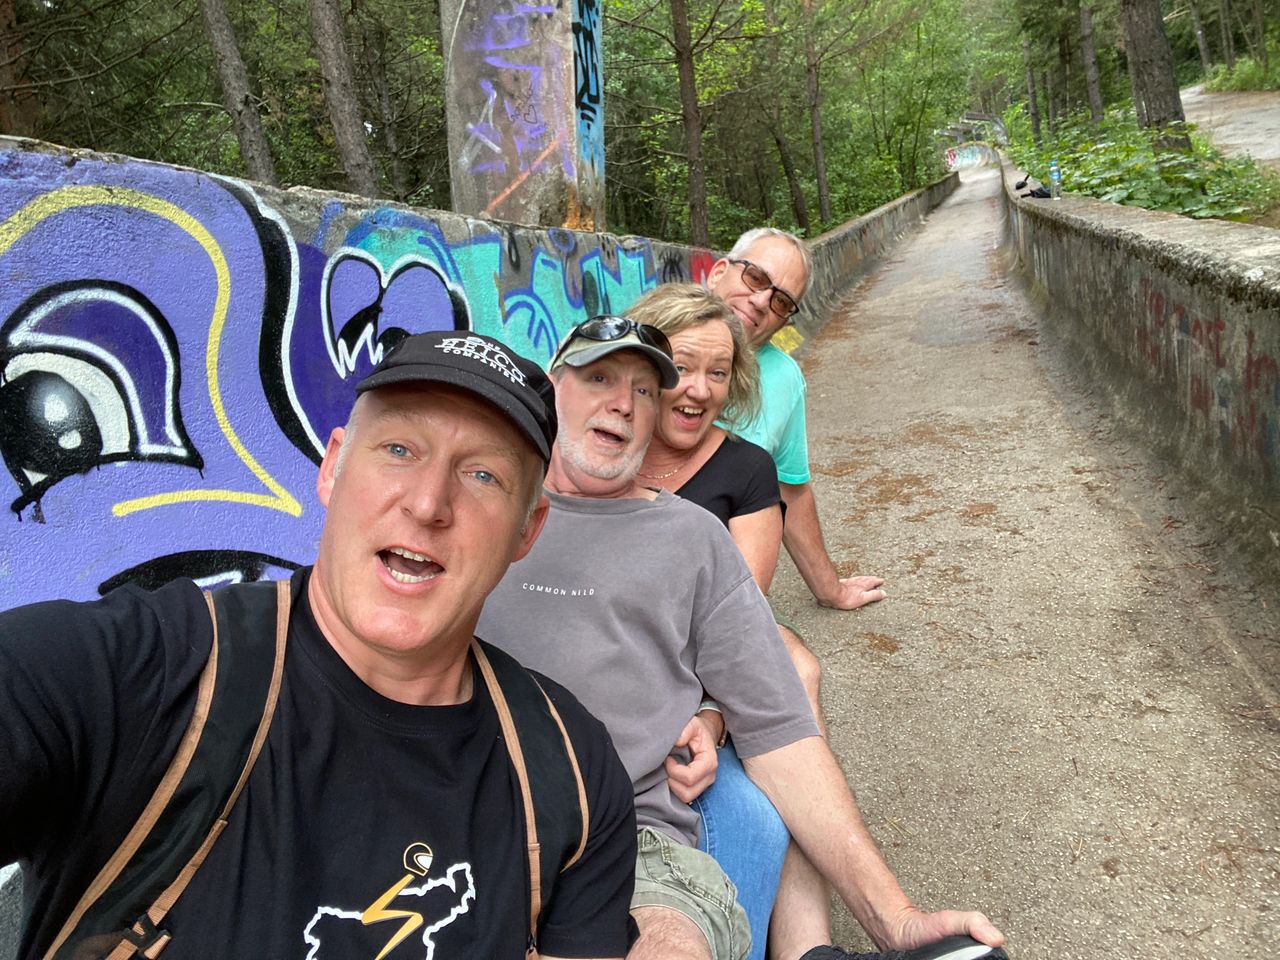 On the bobsled track from the 1984 Winter Olympics in Sarajevo